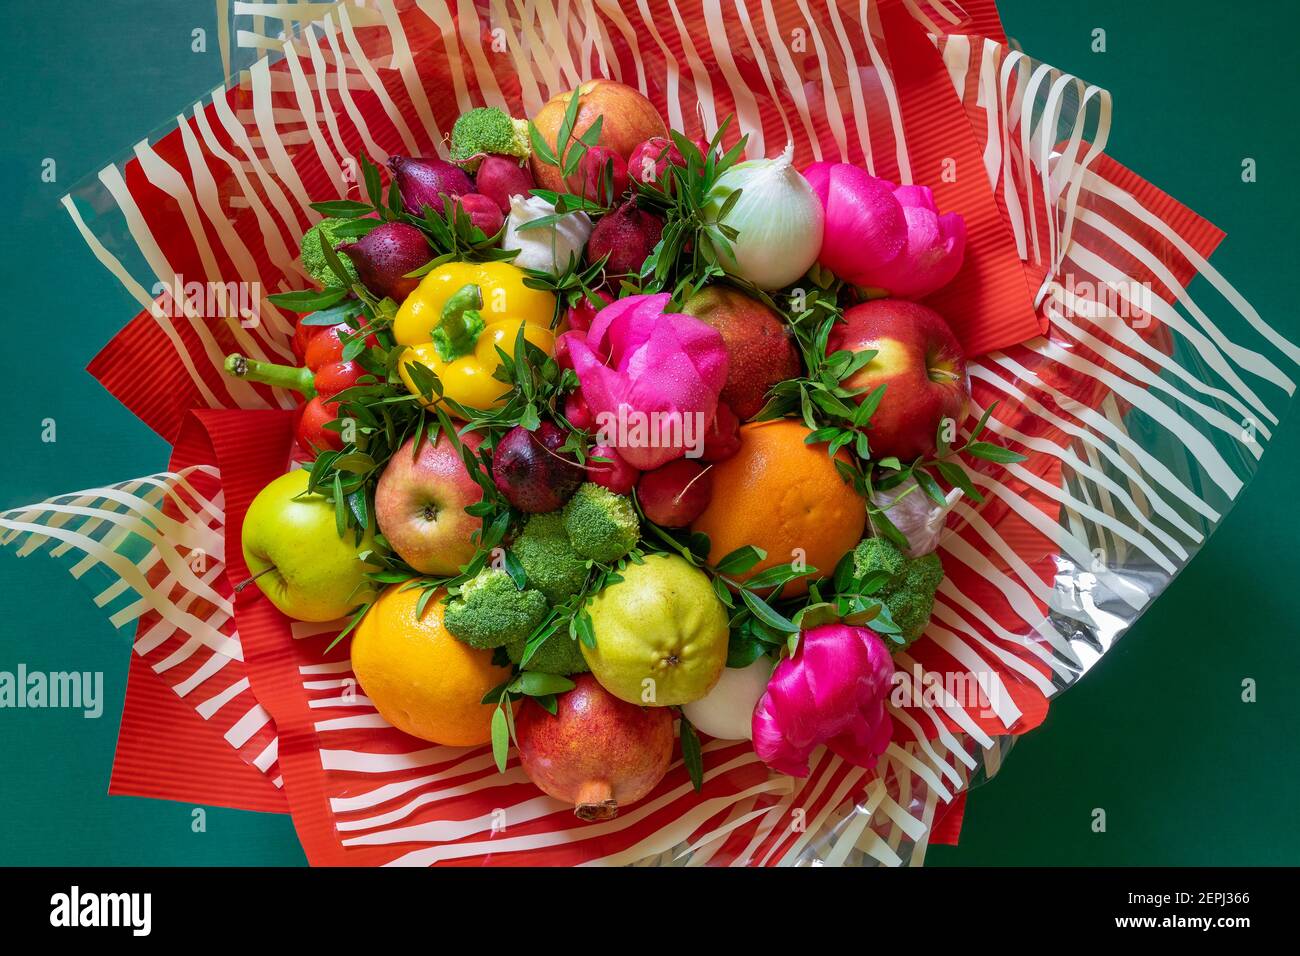 A vibrant multicolored bouquet of vegetables and fruits with pink peonies and green leaves wrapped in corrugated red paper and striped clear cellophan Stock Photo